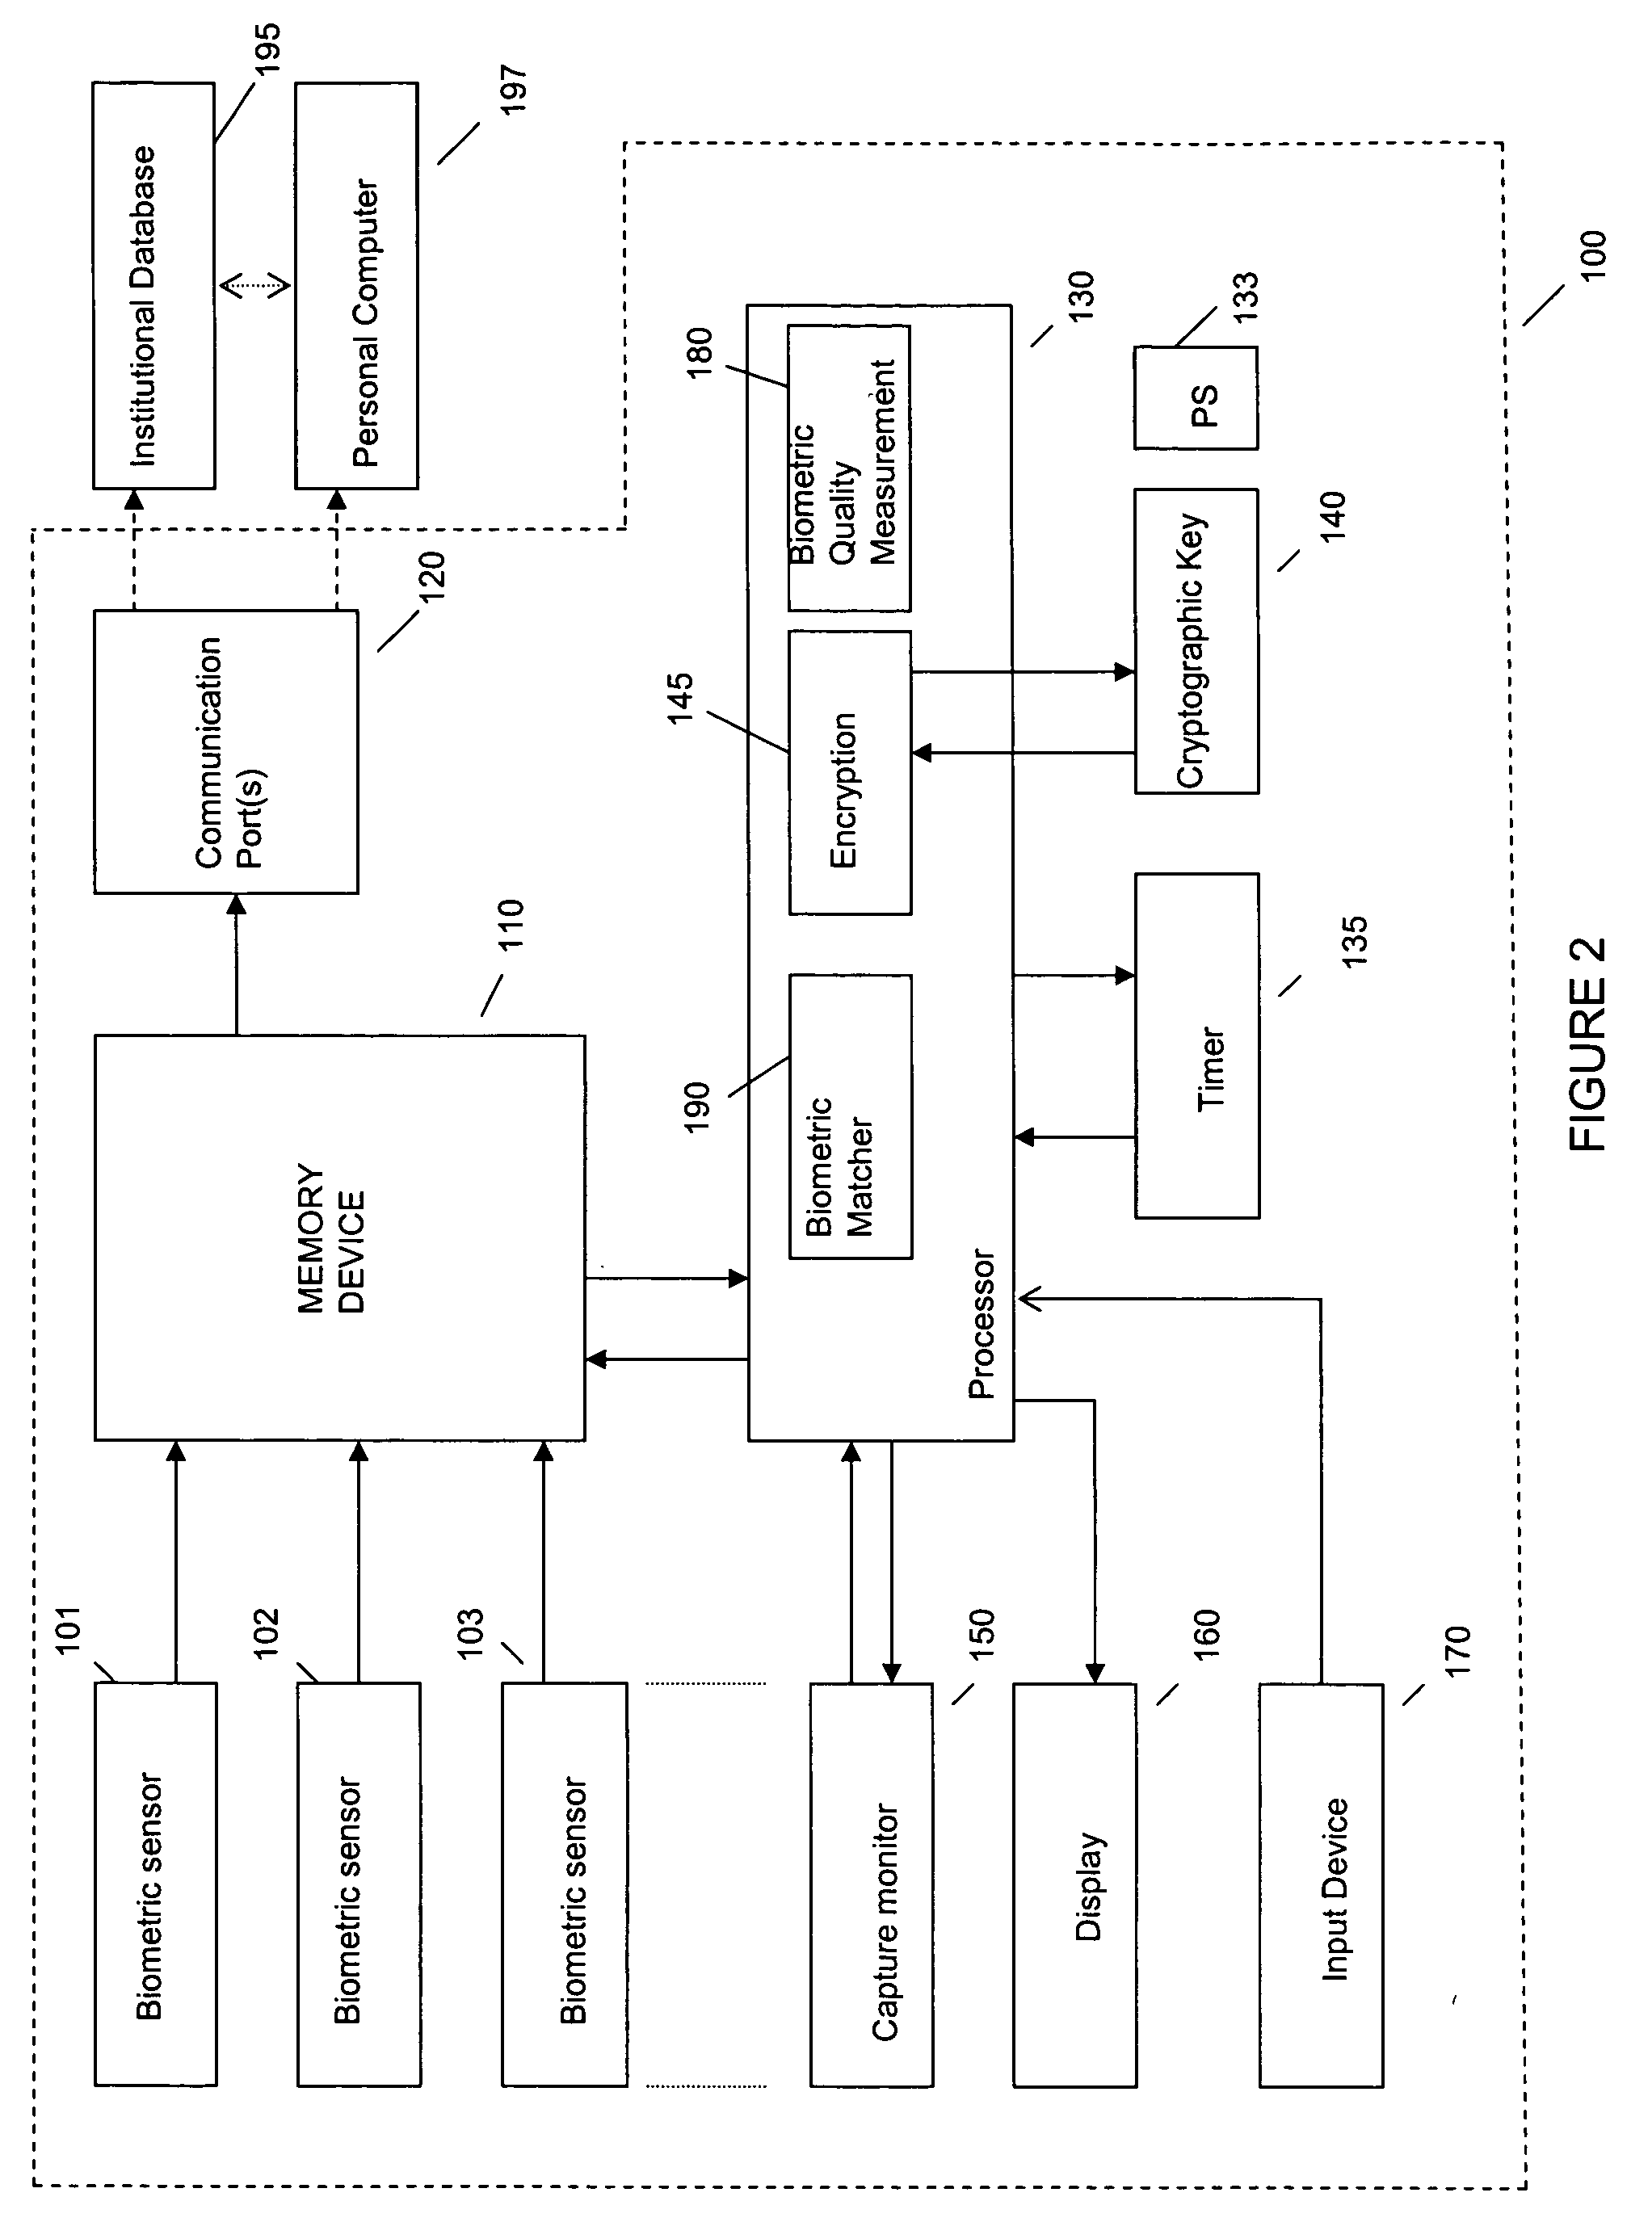 System and method for remote self-enrollment in biometric databases